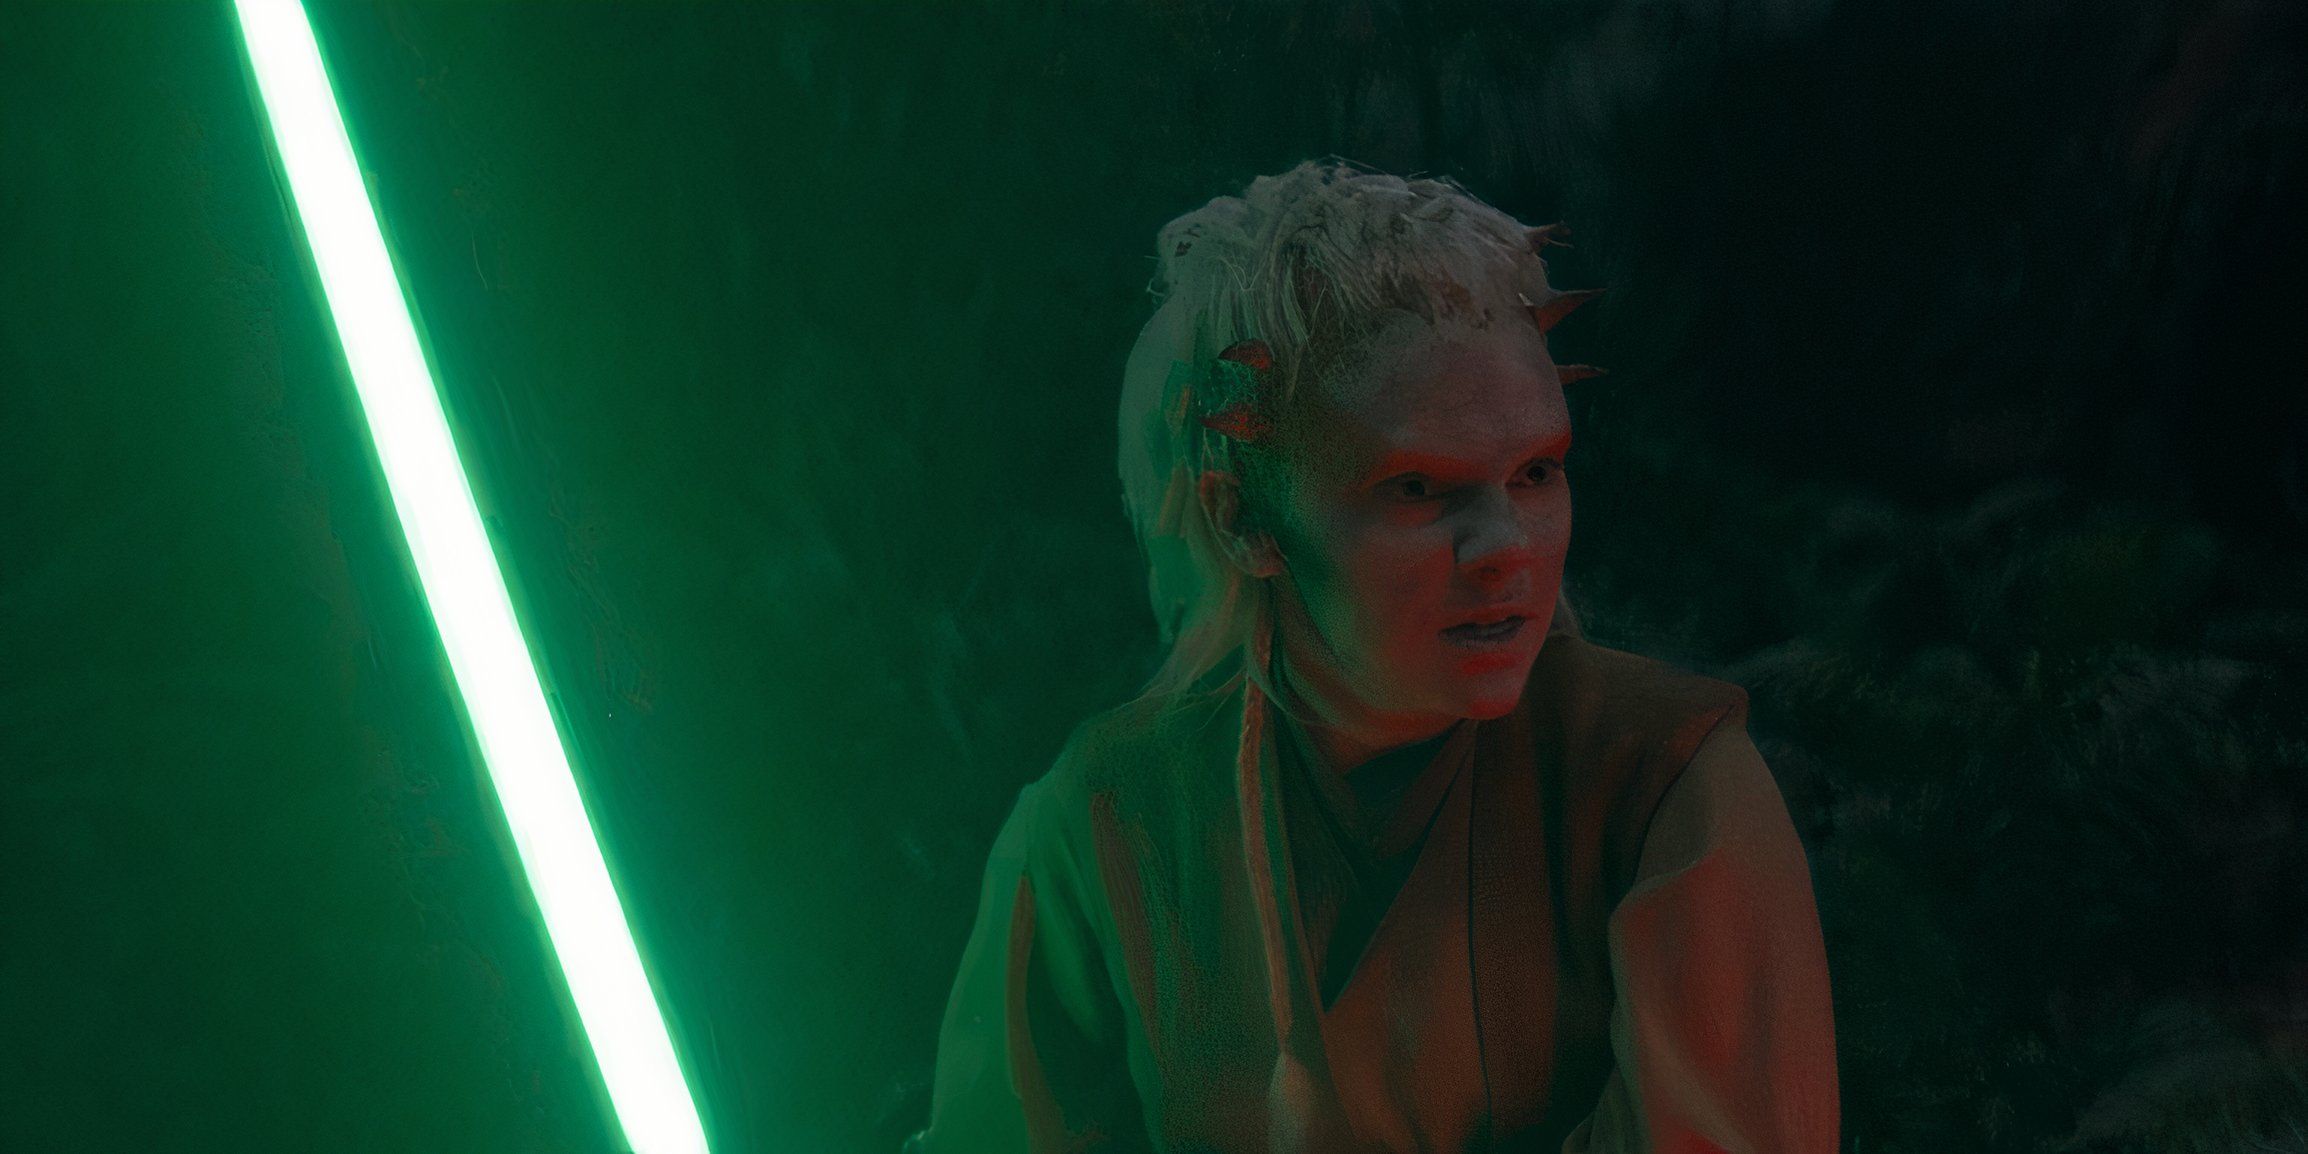 Jecki Lon (Dafne Keen) with an angry expression on her face while holding a green lightsaber in The Acolyte